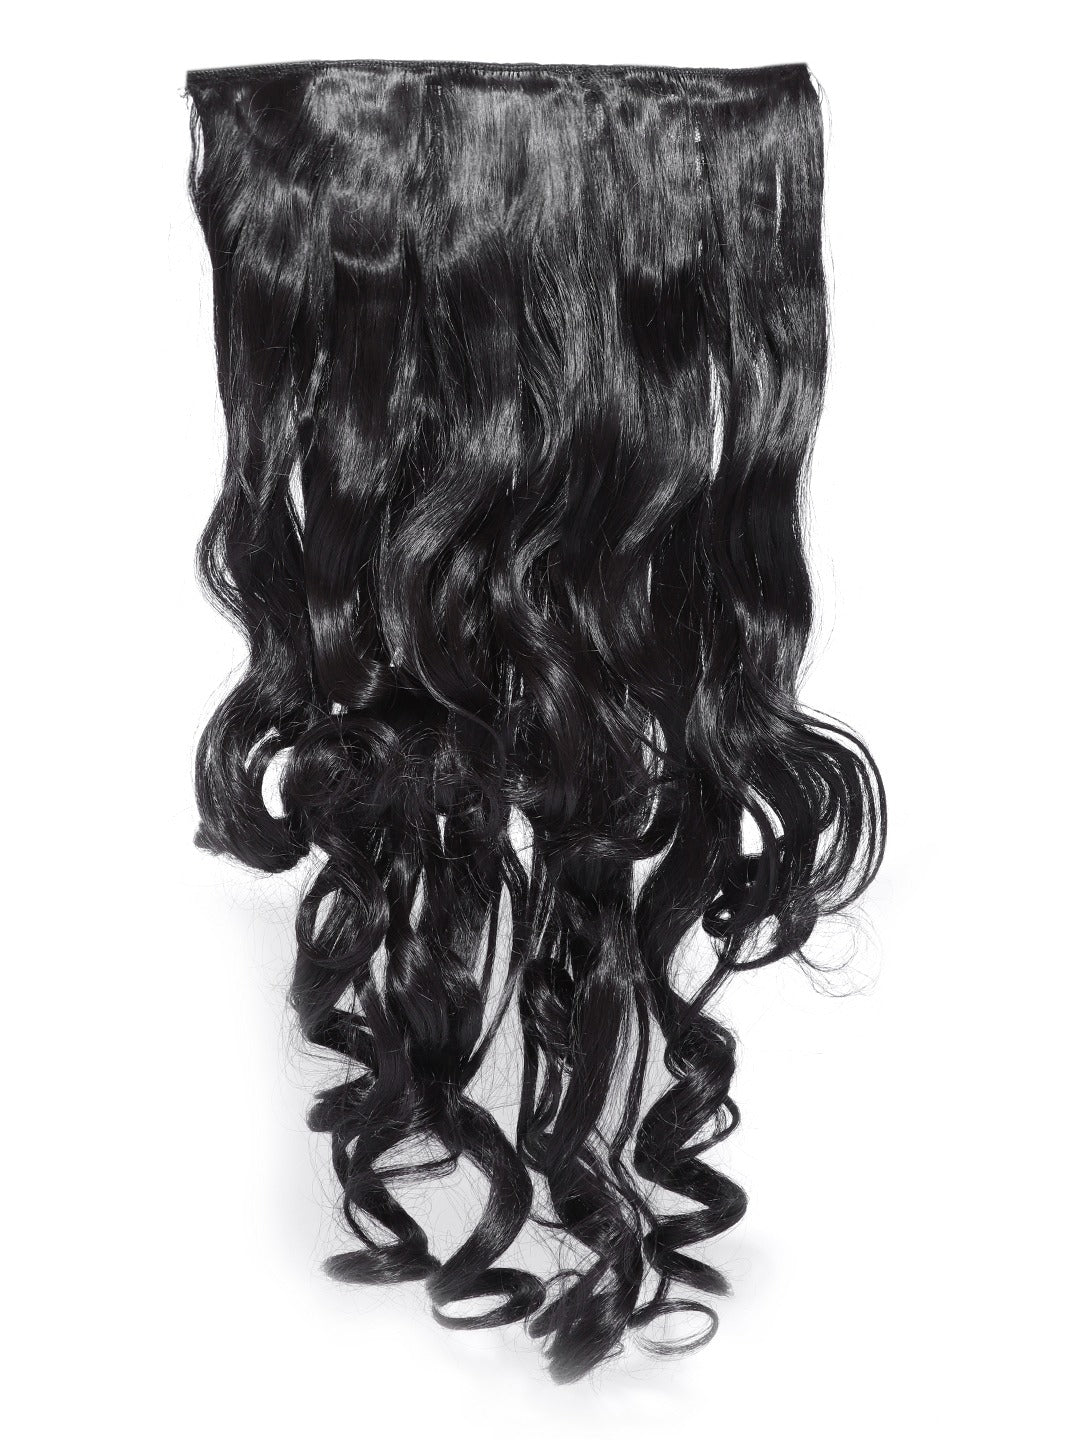 Blueberry Dark Brown Curly/Wavy premium Hair Extension with 5 clips